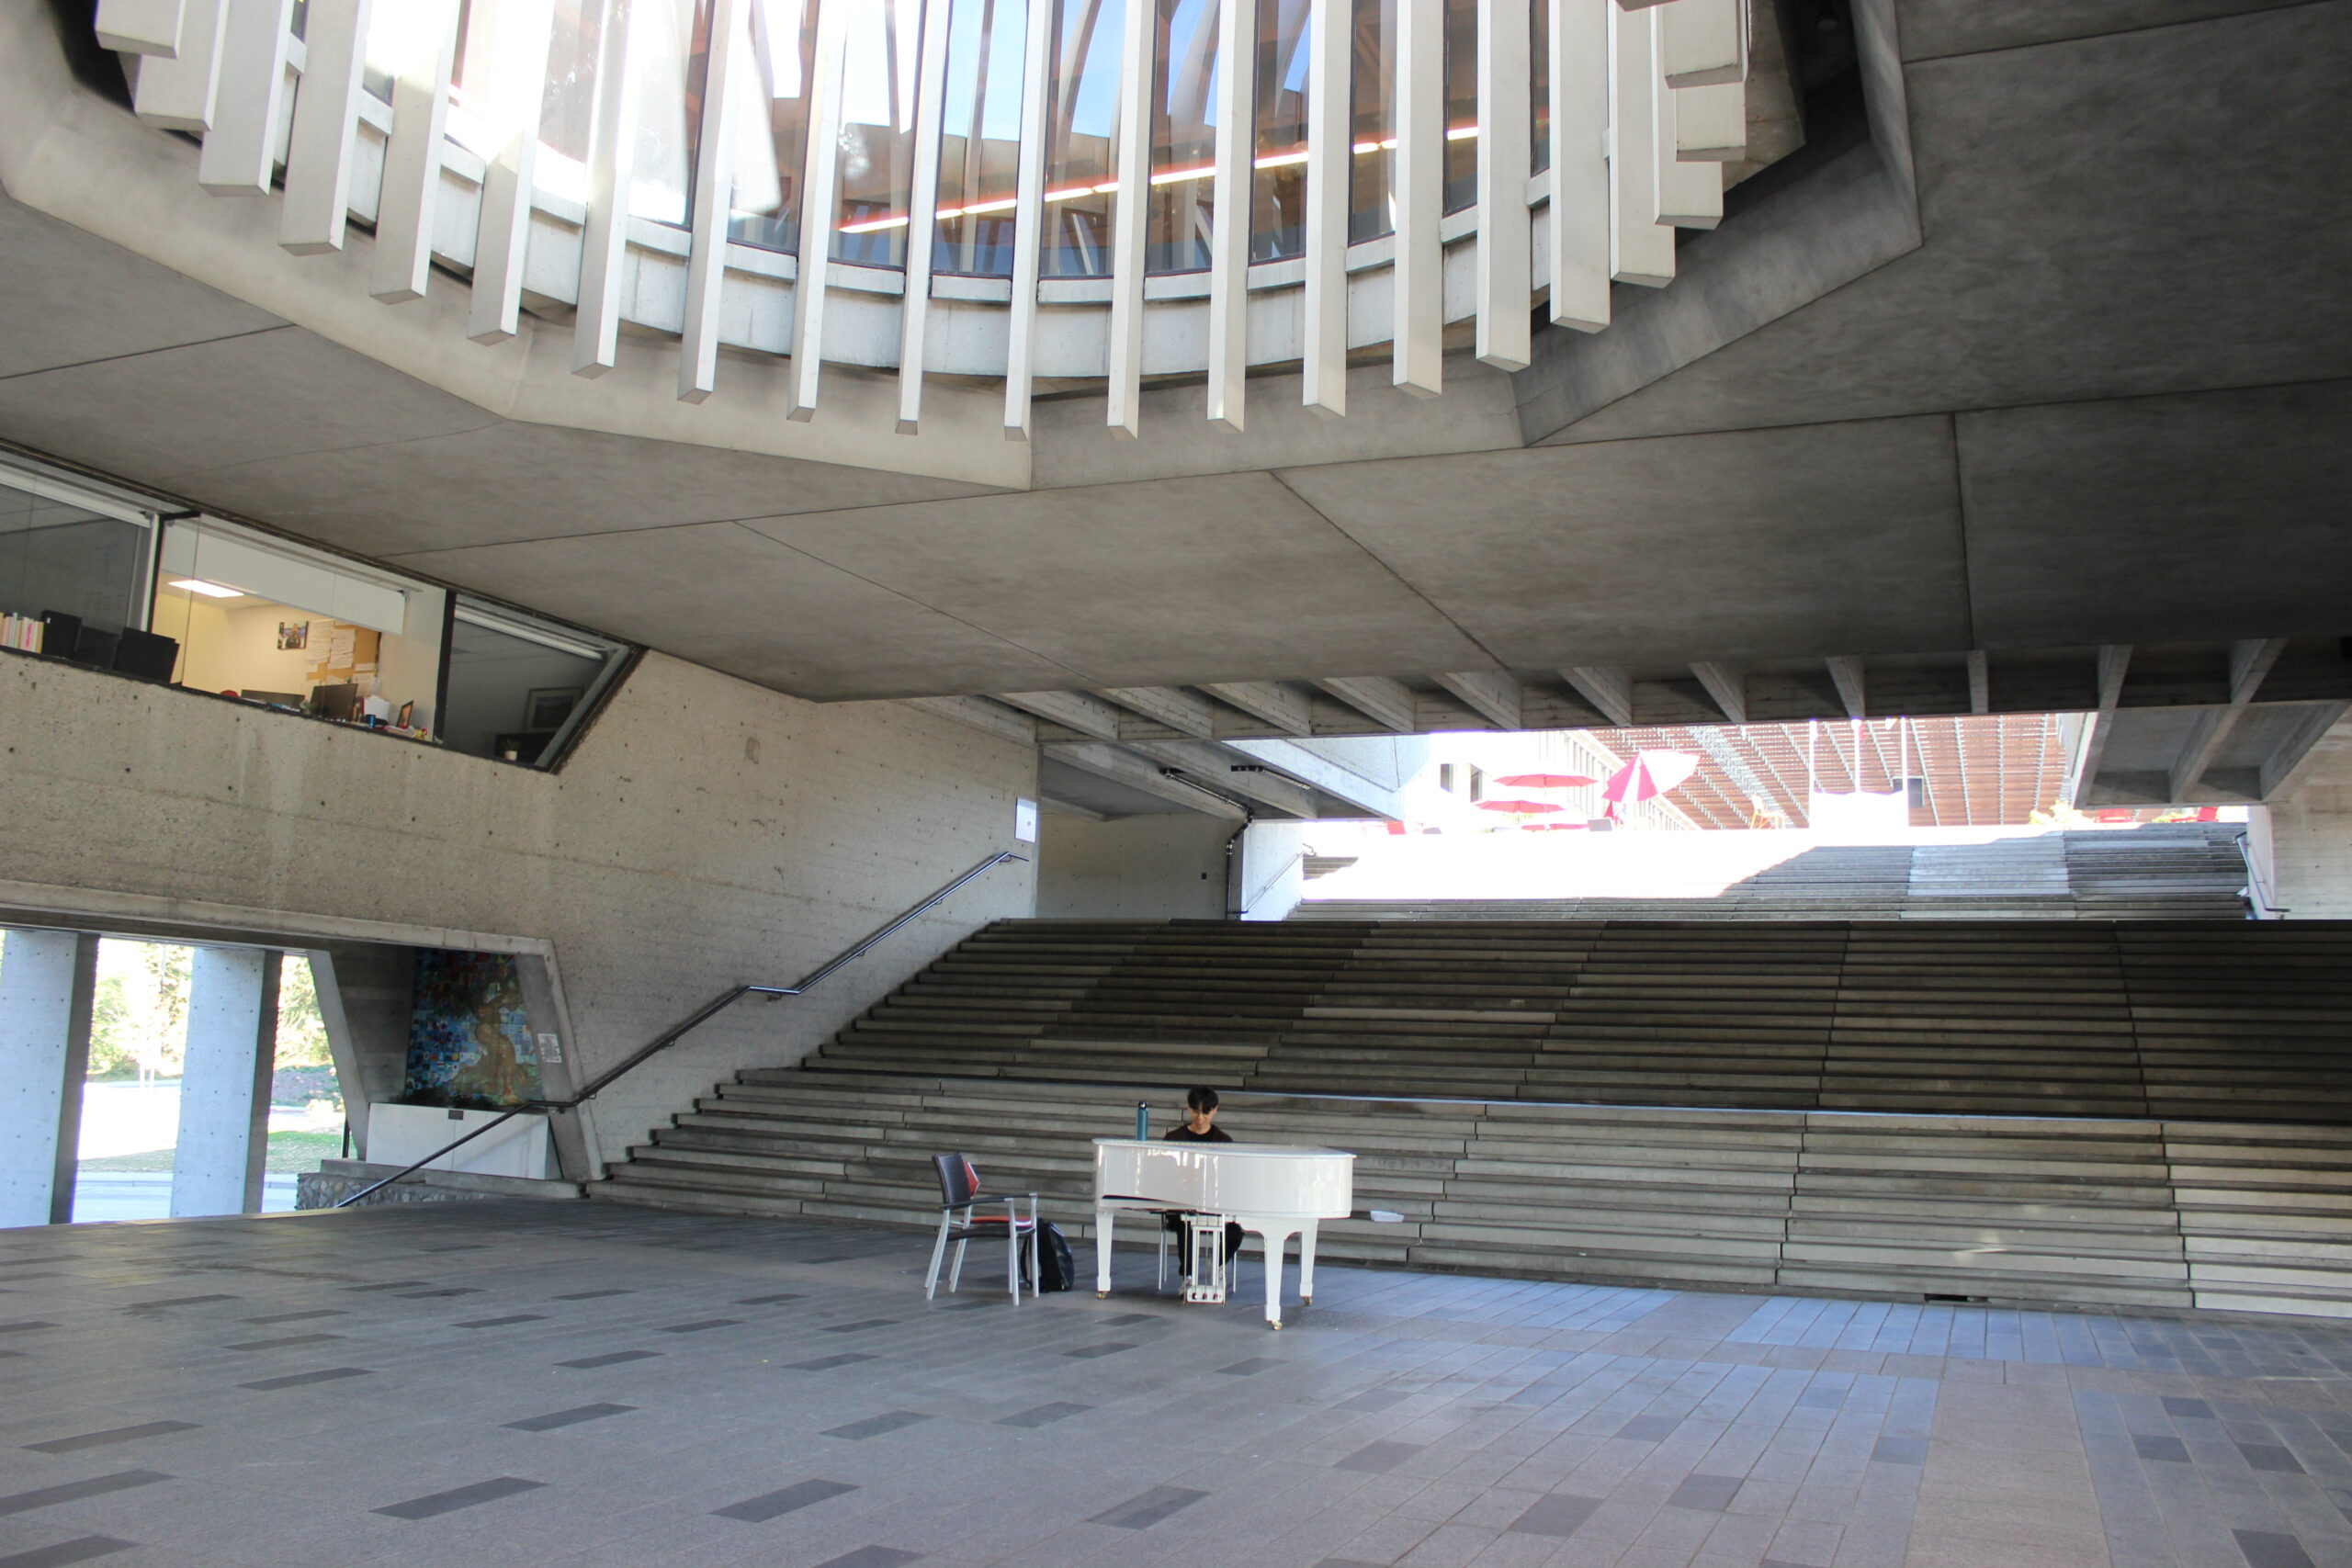 This is a photo of the SFU Burnaby campus. The staircase leading up to the convocation mall is shown where a piano sits. A student sits at the piano.